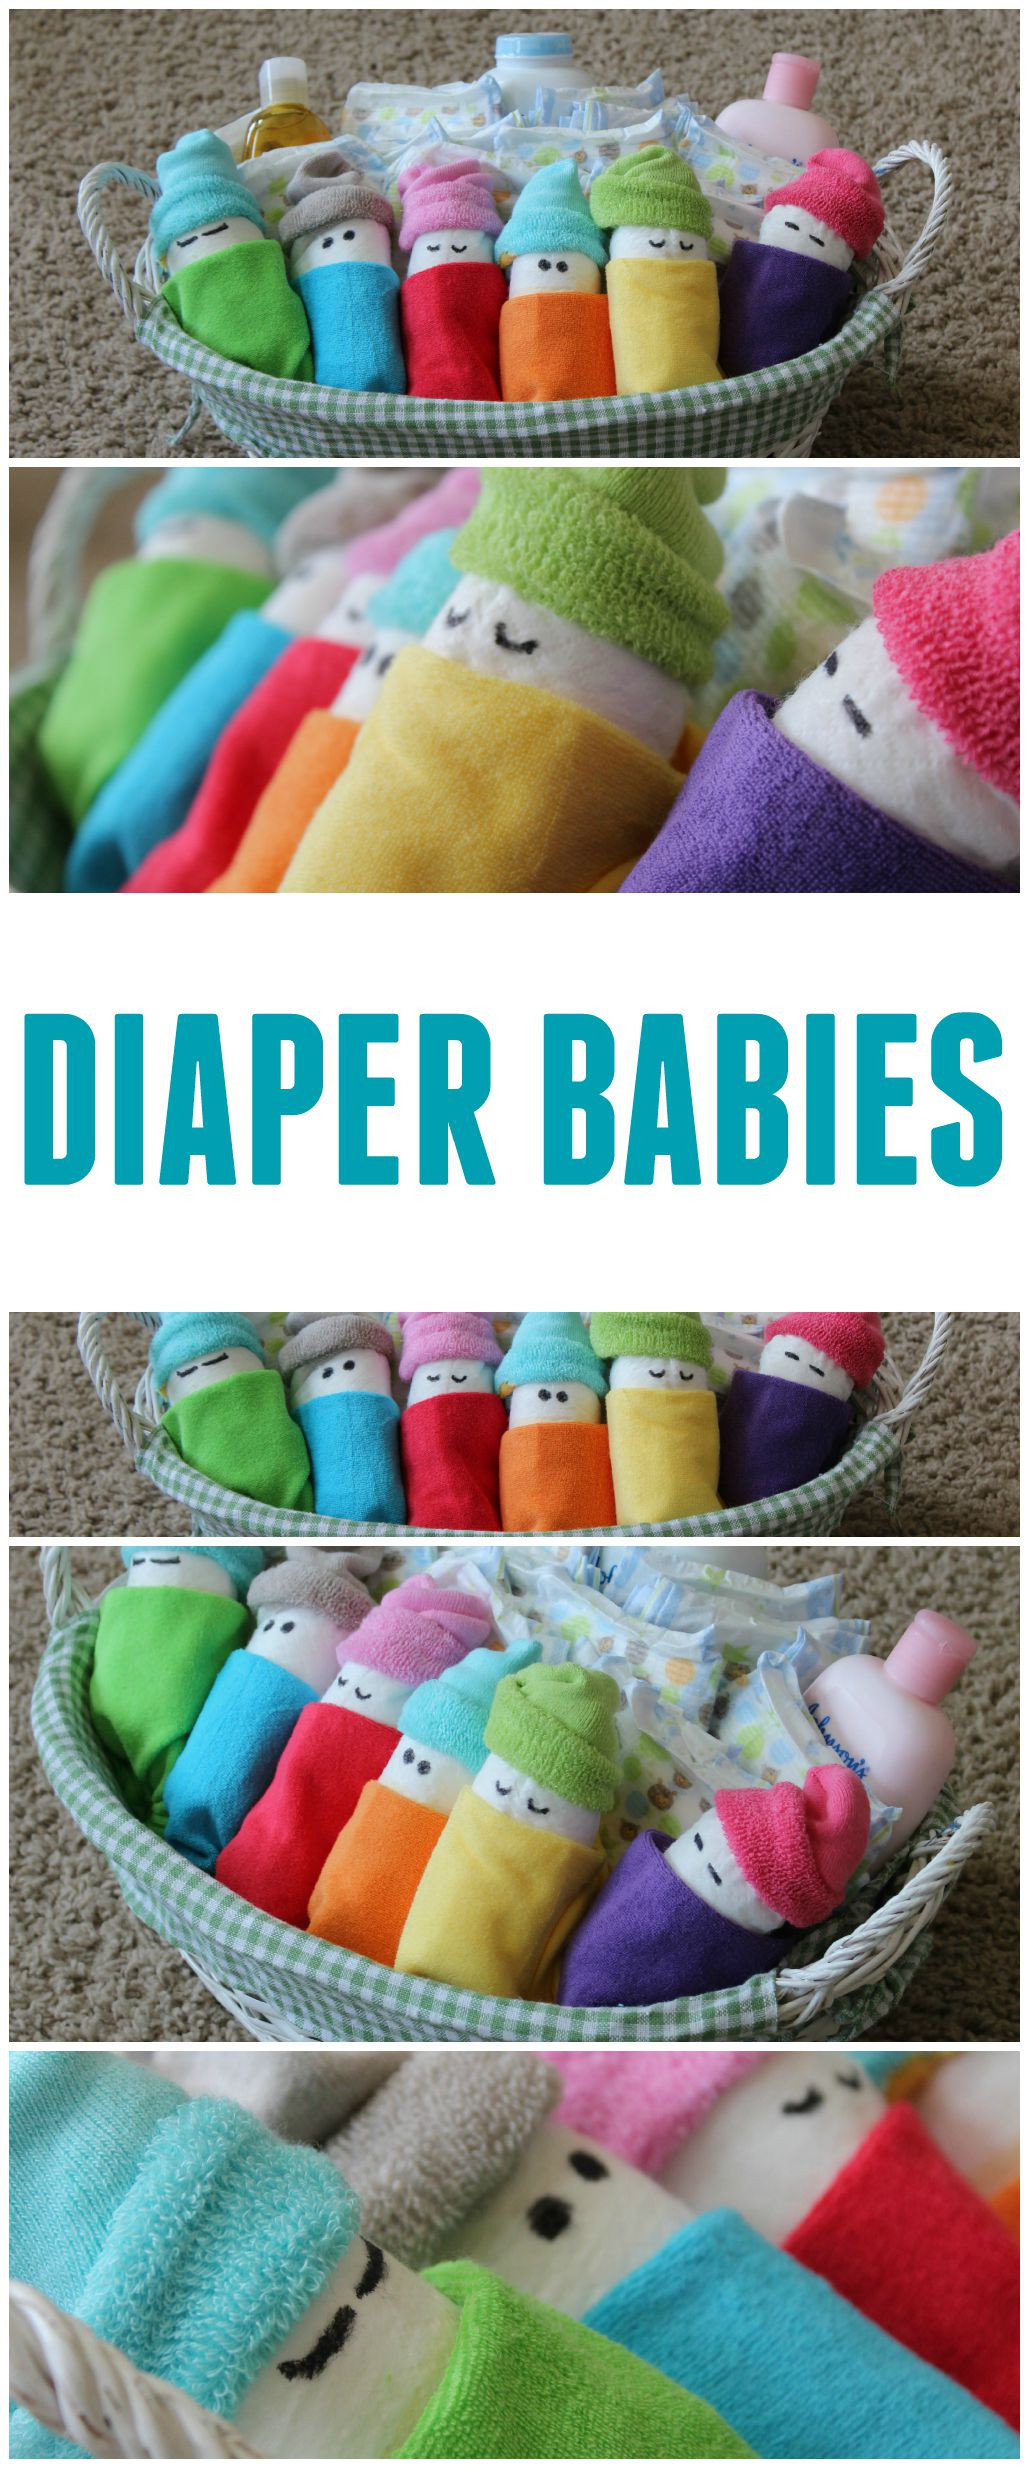 Babyshower Gift Ideas
 How To Make Diaper Babies Easy Baby Shower Gift Idea